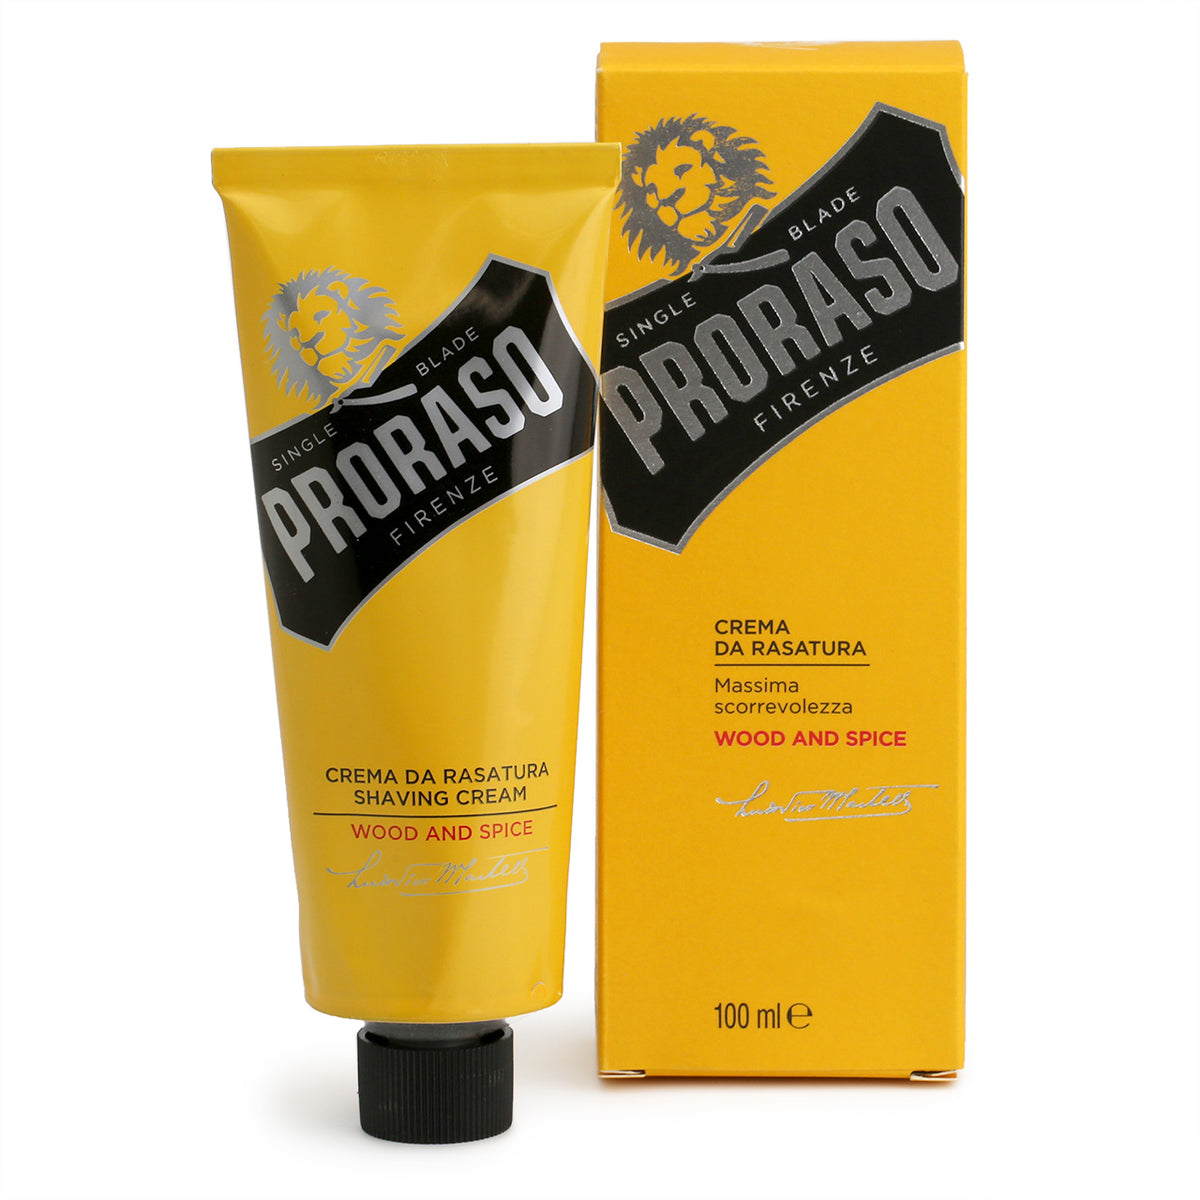 Yellow metal tube of Proraso Wood and Spice Shaving Cream with yellow cardboard box